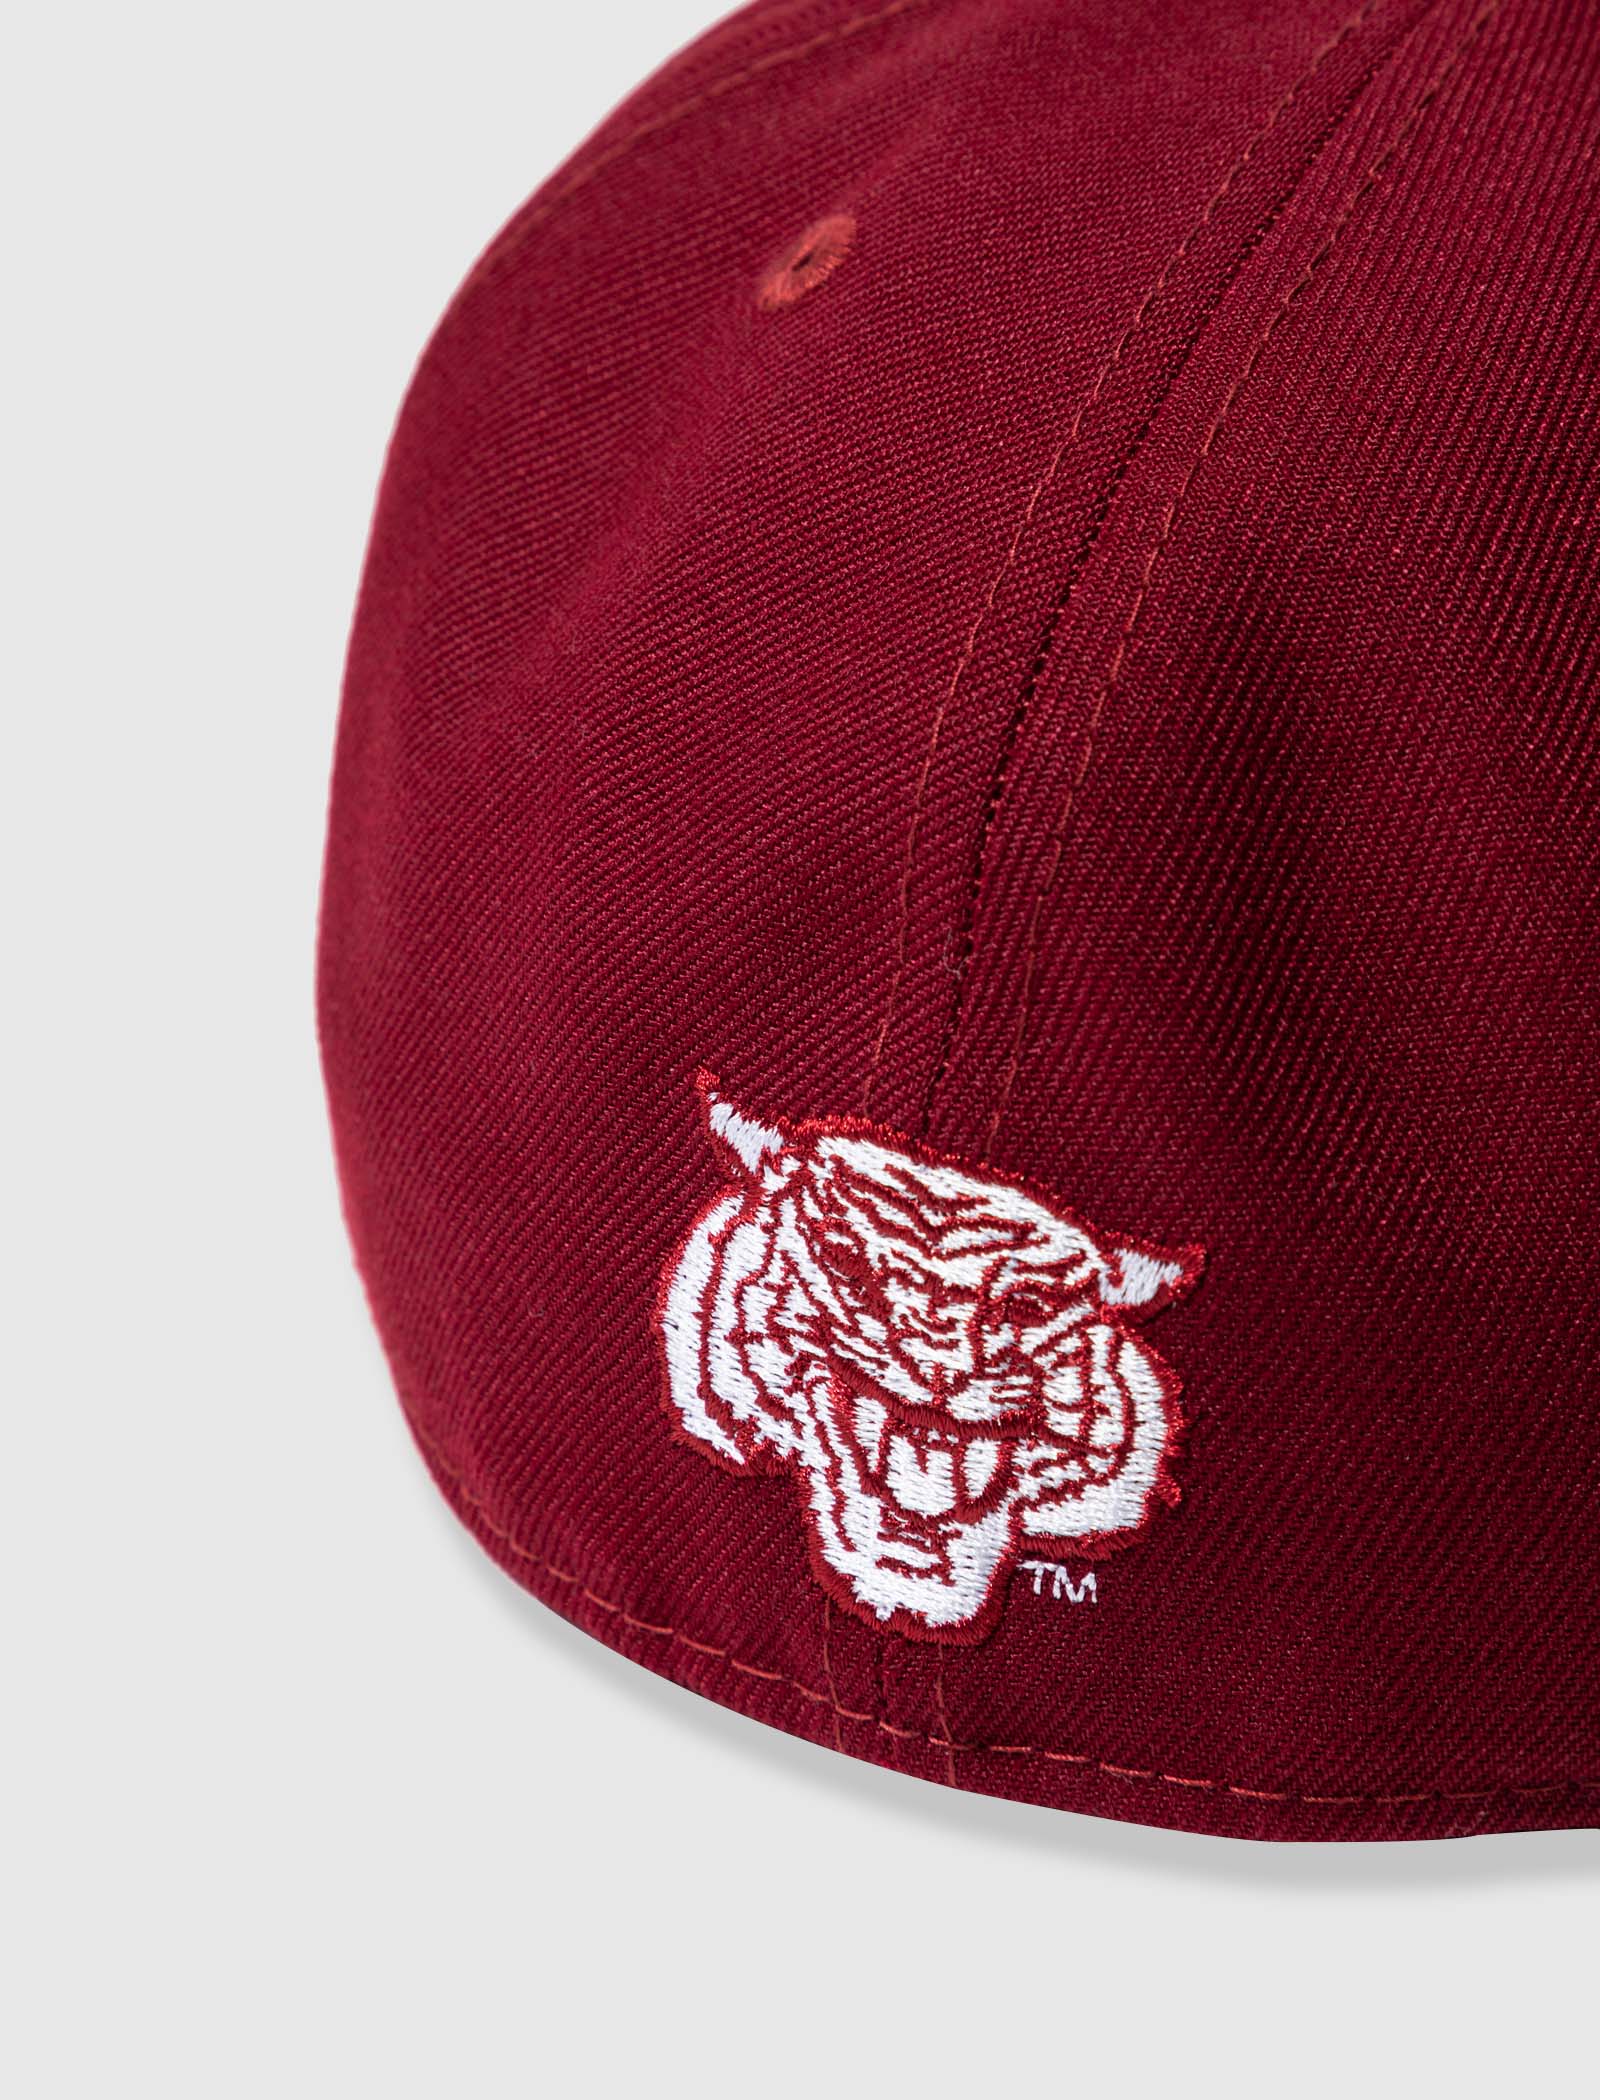 NEW ERA MOREHOUSE TIGERS FITTED HAT